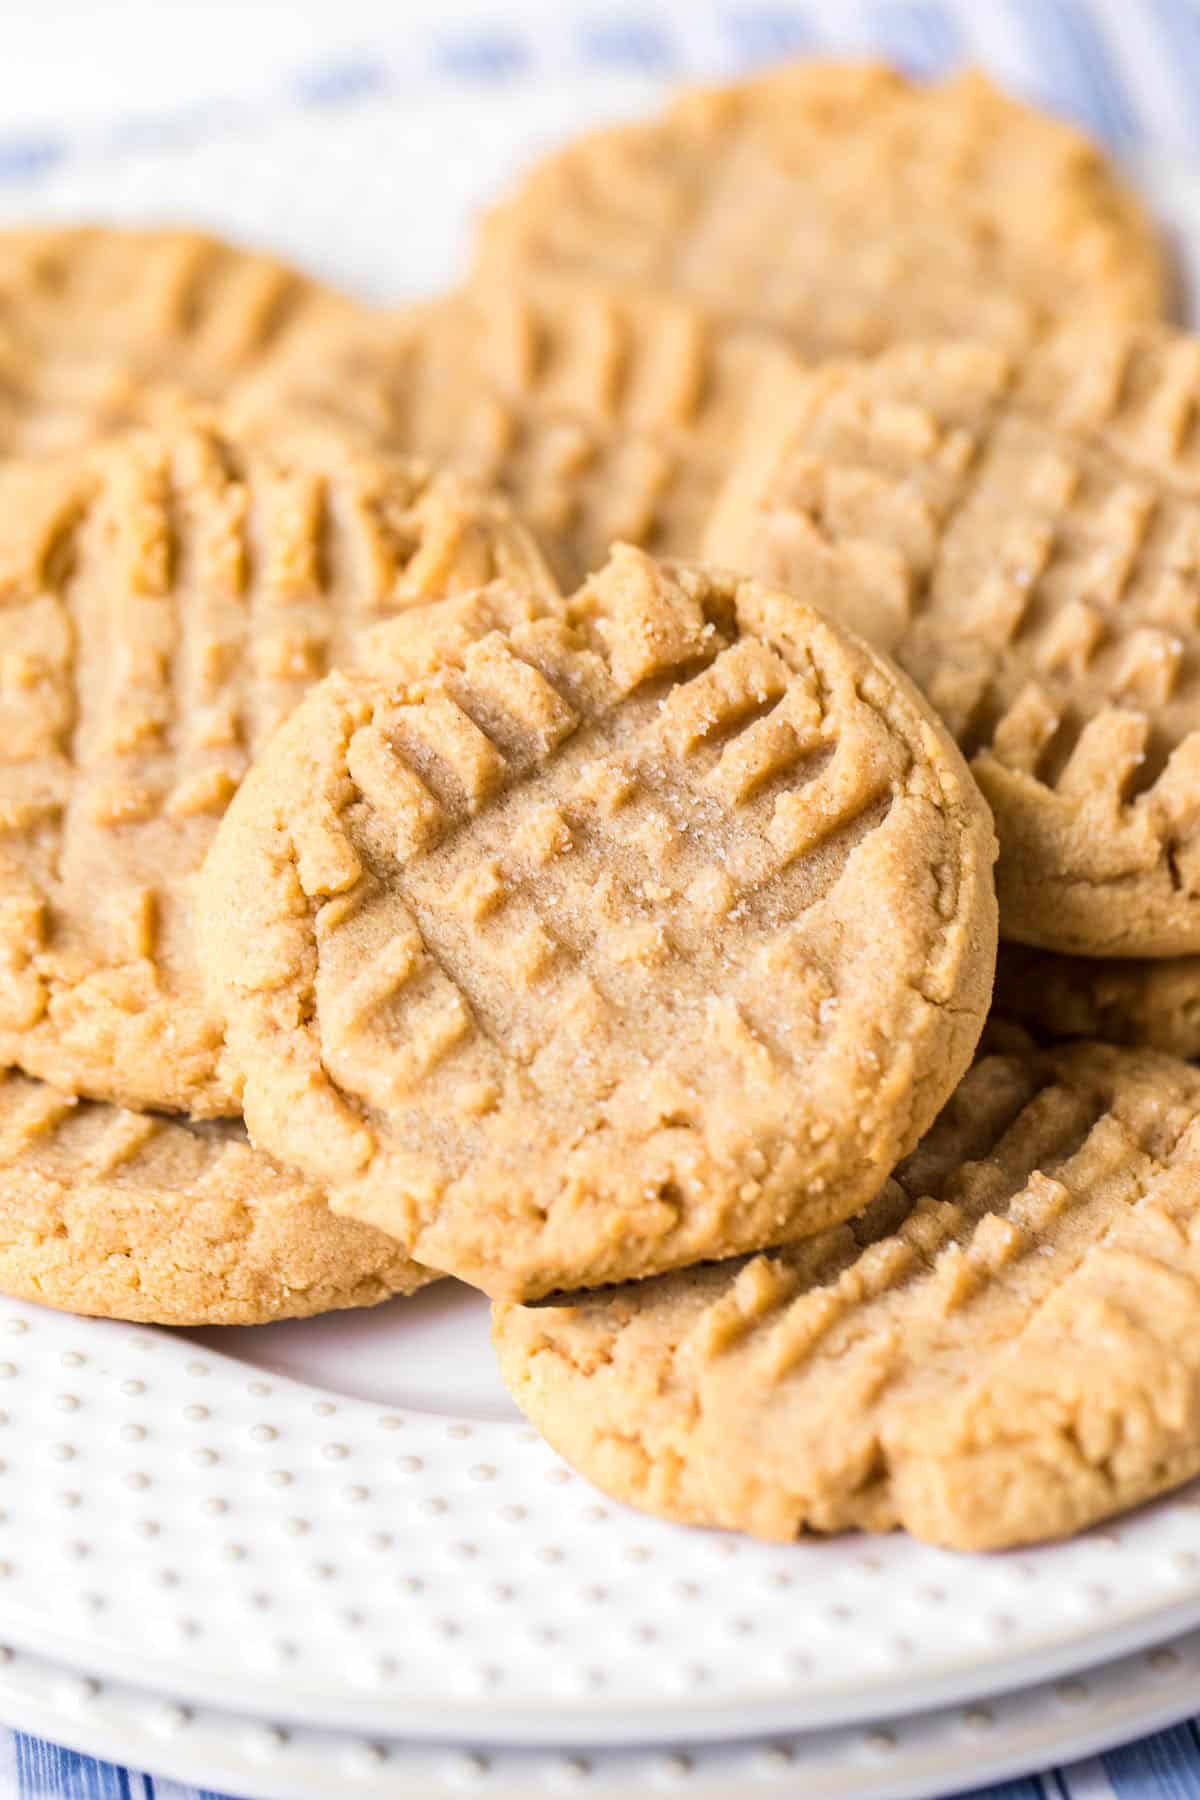 peanut butter cookies on plate